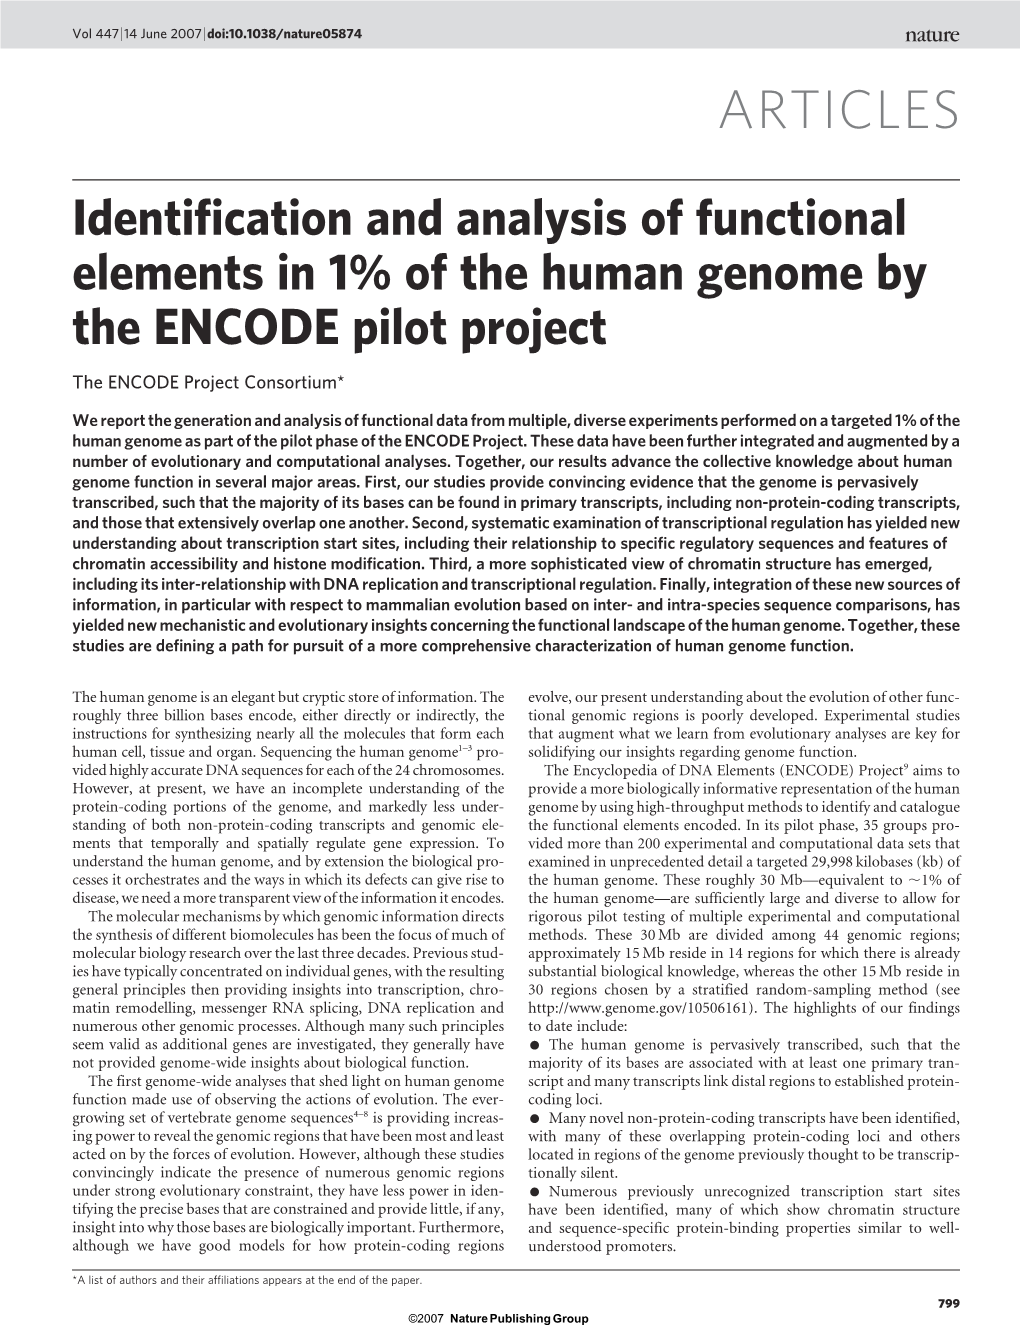 Identification and Analysis of Functional Elements in 1% of the Human Genome by the ENCODE Pilot Project